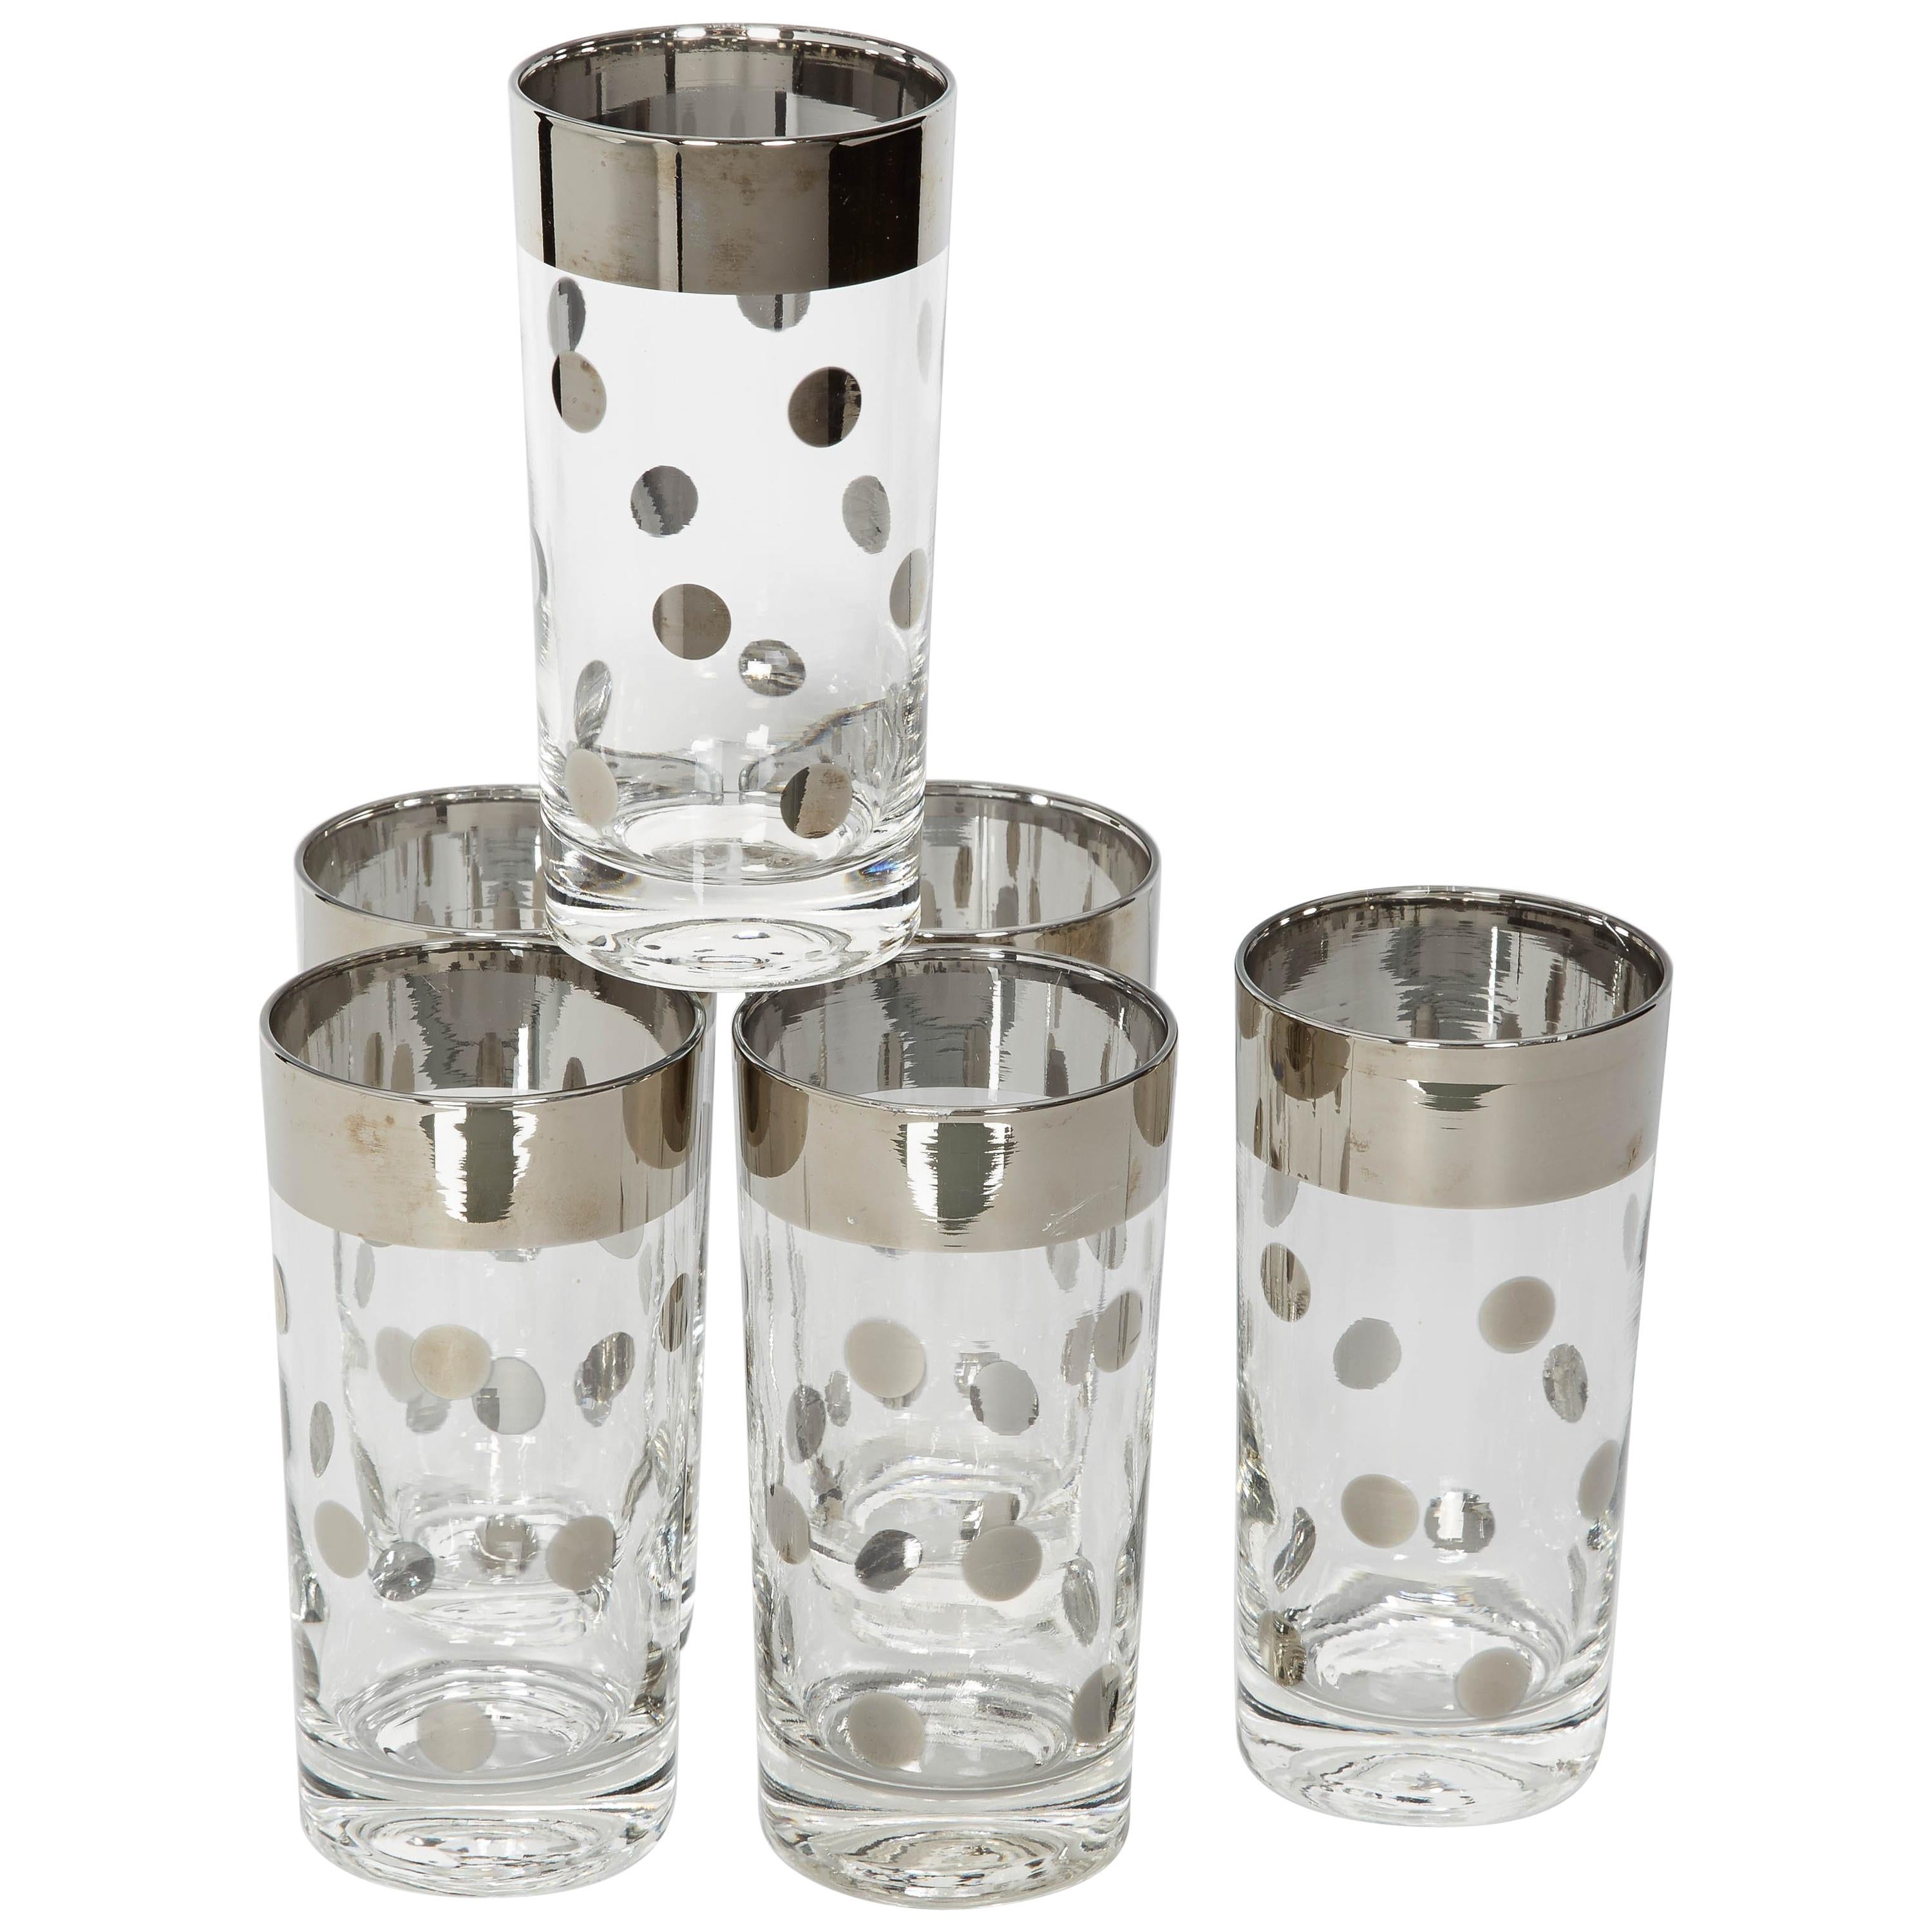 Set of 10 Mid-Century Barware Glasses with Polka Dot Design by Dorothy Thorpe